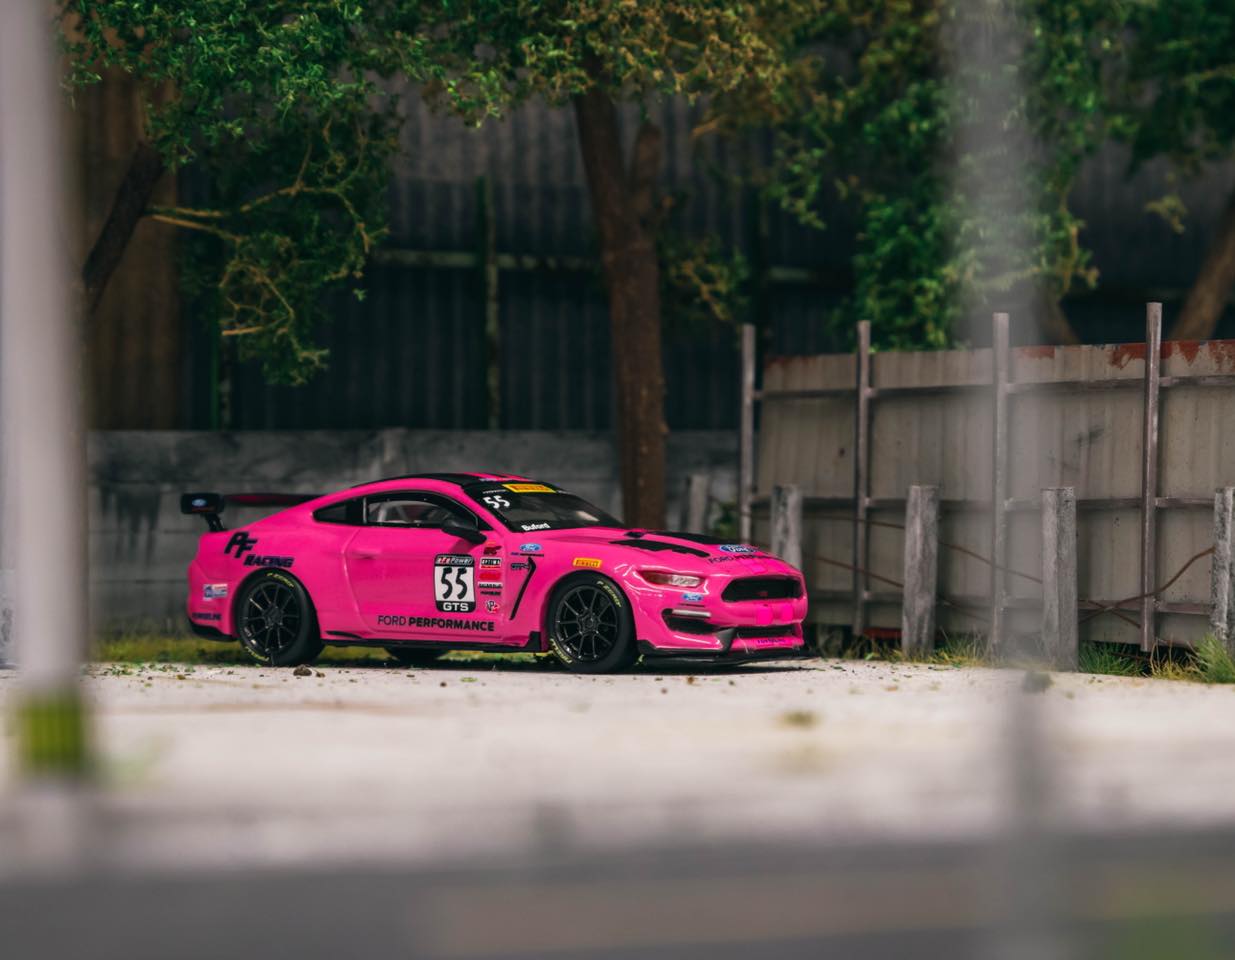 Tarmac Works Global64 Ford Mustang GT4 Pirelli World Challenge 2018 Pink